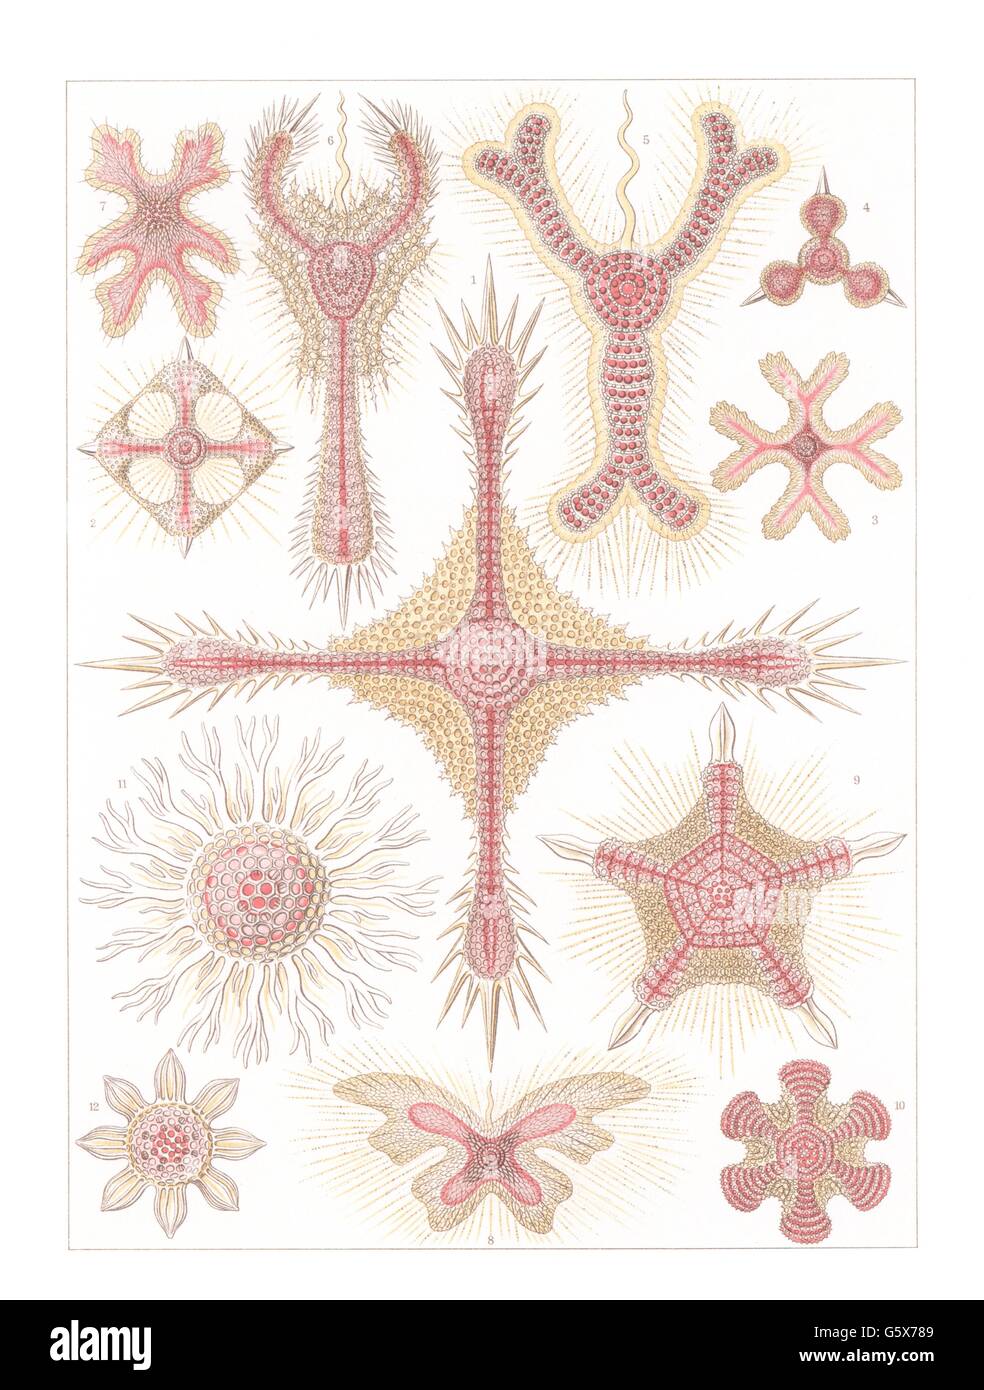 zoology / animals, cnidaria, discoidea, colour lithograph, out of: Ernst Haeckel, 'Kunstformen der Natur', Leipzig - Vienna, 1899 - 1904, Additional-Rights-Clearences-Not Available Stock Photo